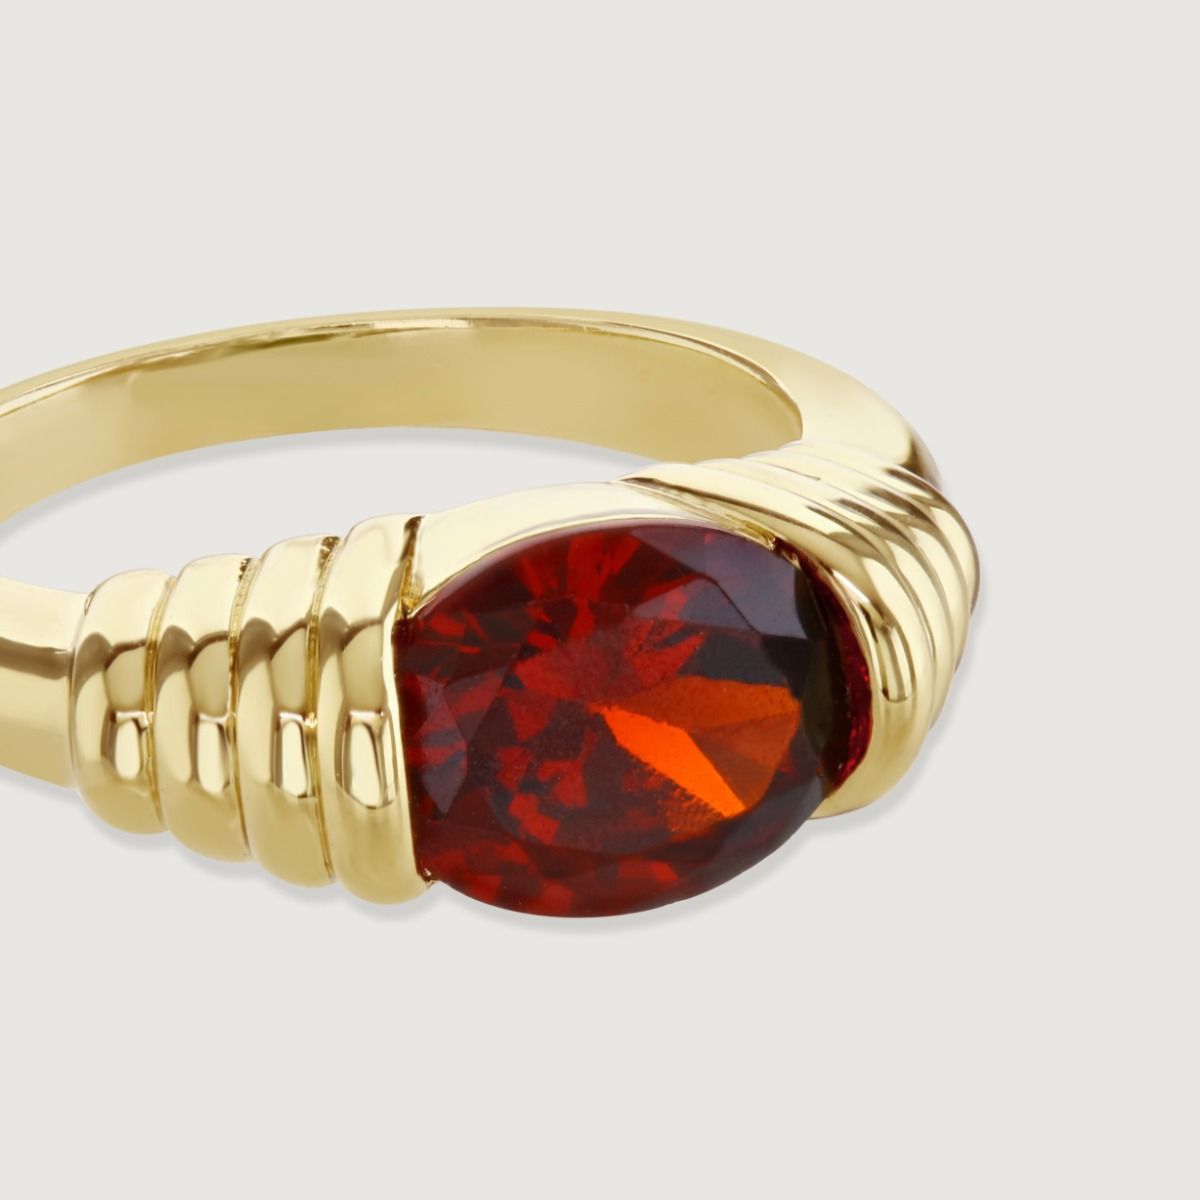 The Ancient Heirloom Ring, inspired by antiquity, features a bold cubic zirconia stone enveloped in gold bands, accentuating its prominence as a statement piece. With the stone as the captivating focal point, this ring becomes a cherished heirloom, symbol